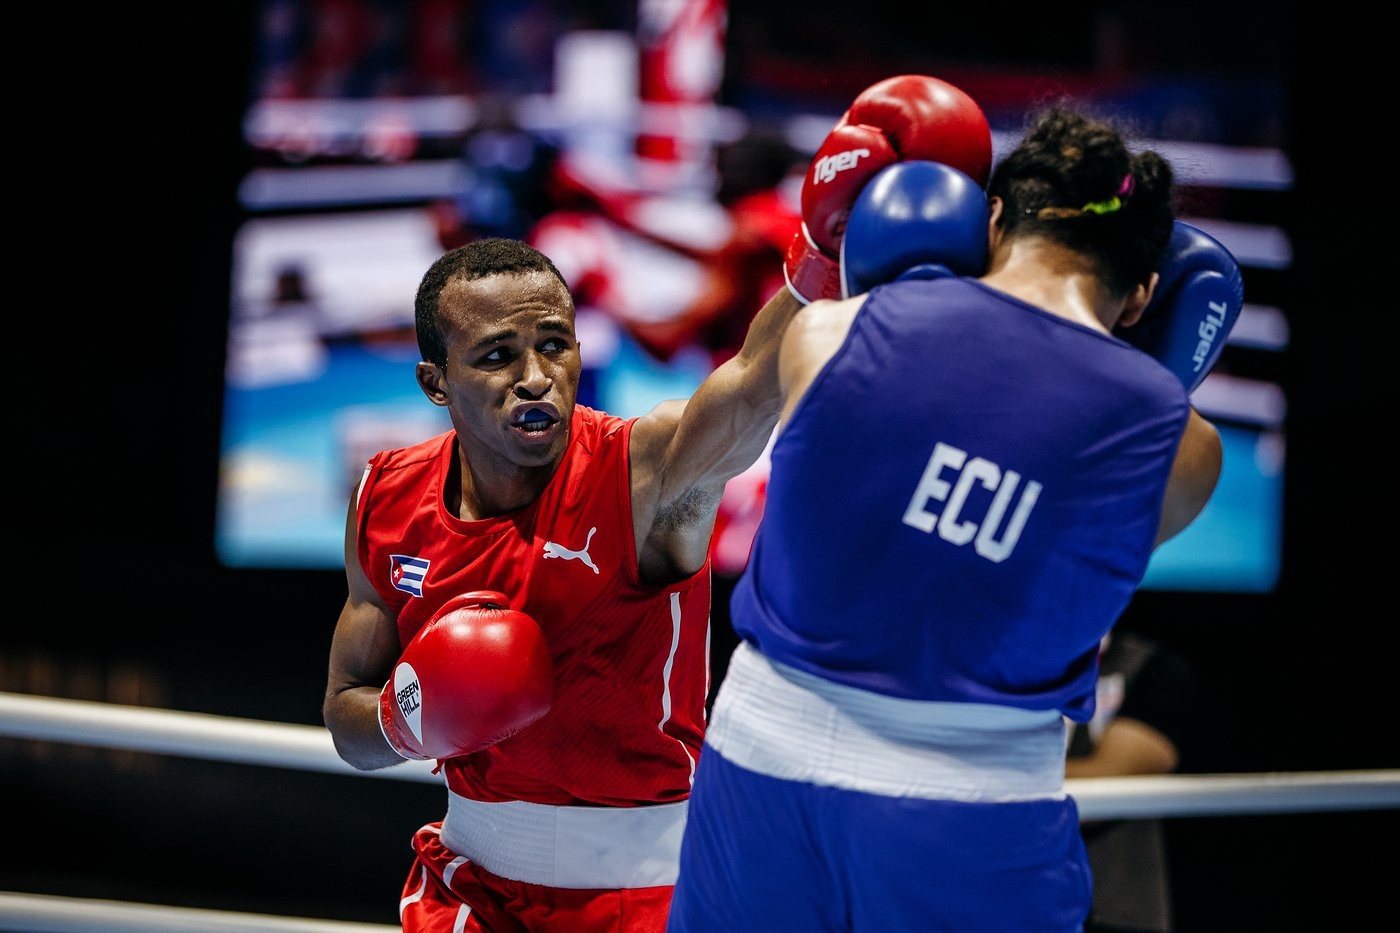 Cuba's Lazaro Álvarez, featherweight top seed, triumphed in his opening bout at the AIBA World Championships ©Yekaterinburg 2019